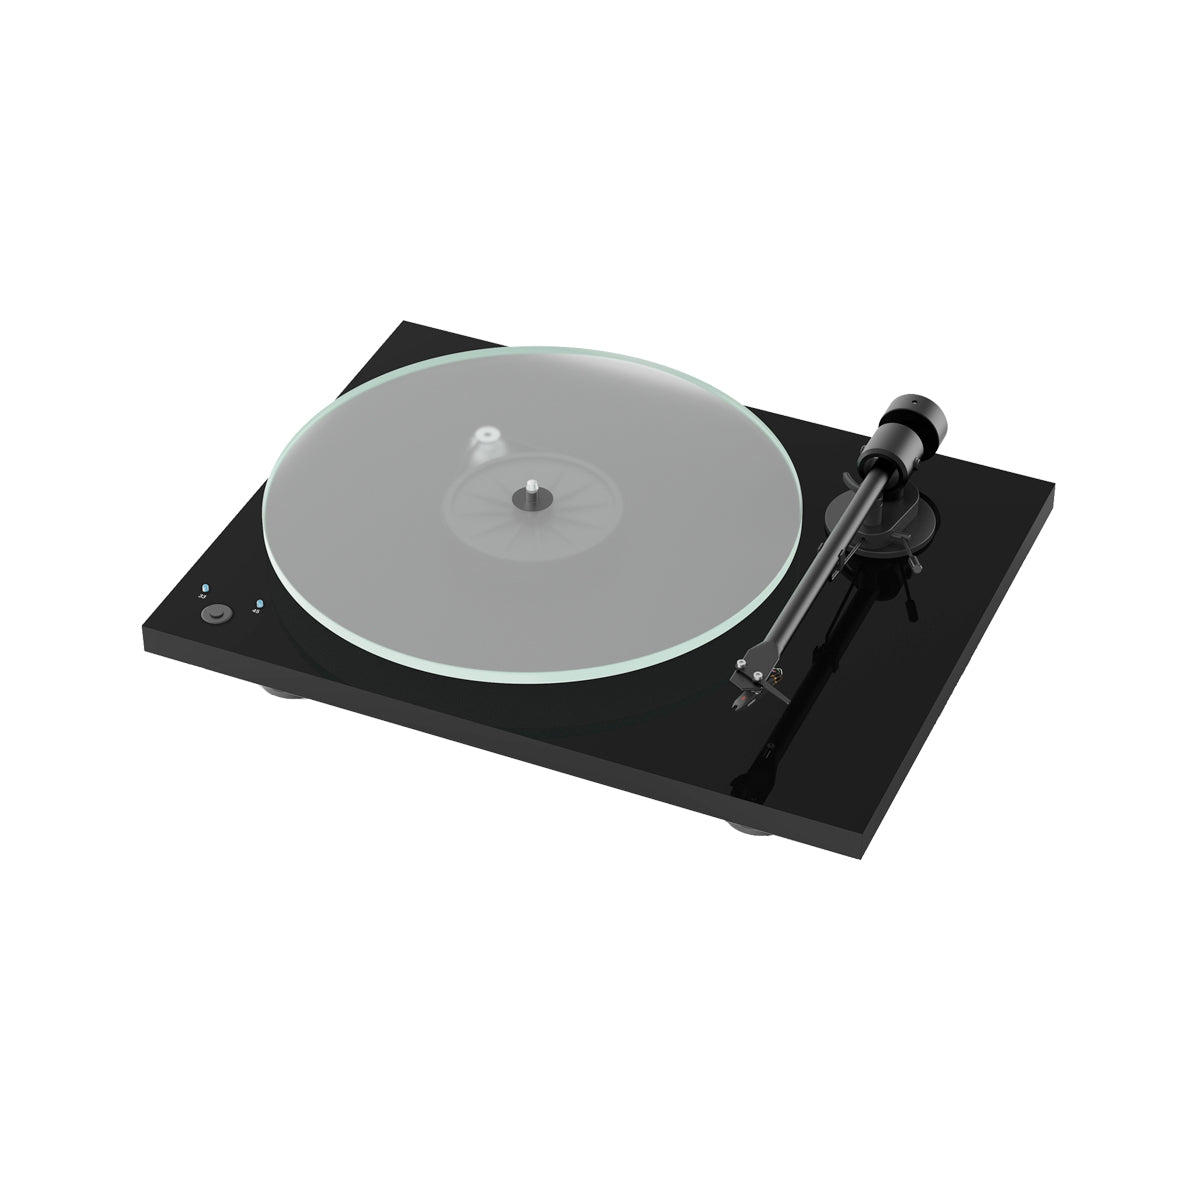 Pro-Ject T1 Phono SB Turntable - The Audio Experts